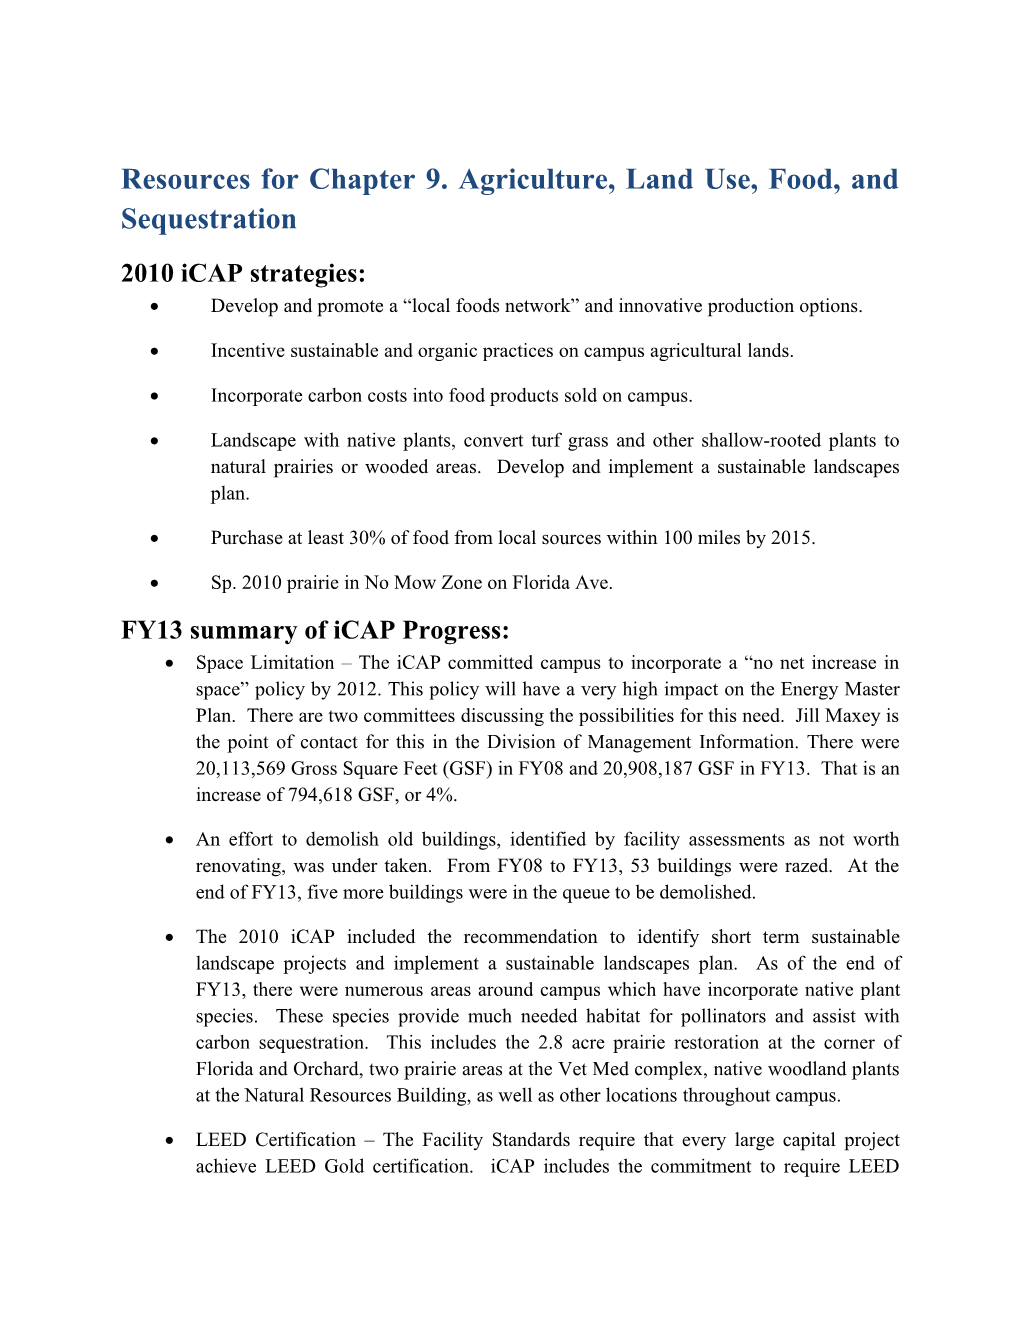 Resources for Chapter 9.Agriculture, Land Use, Food, and Sequestration